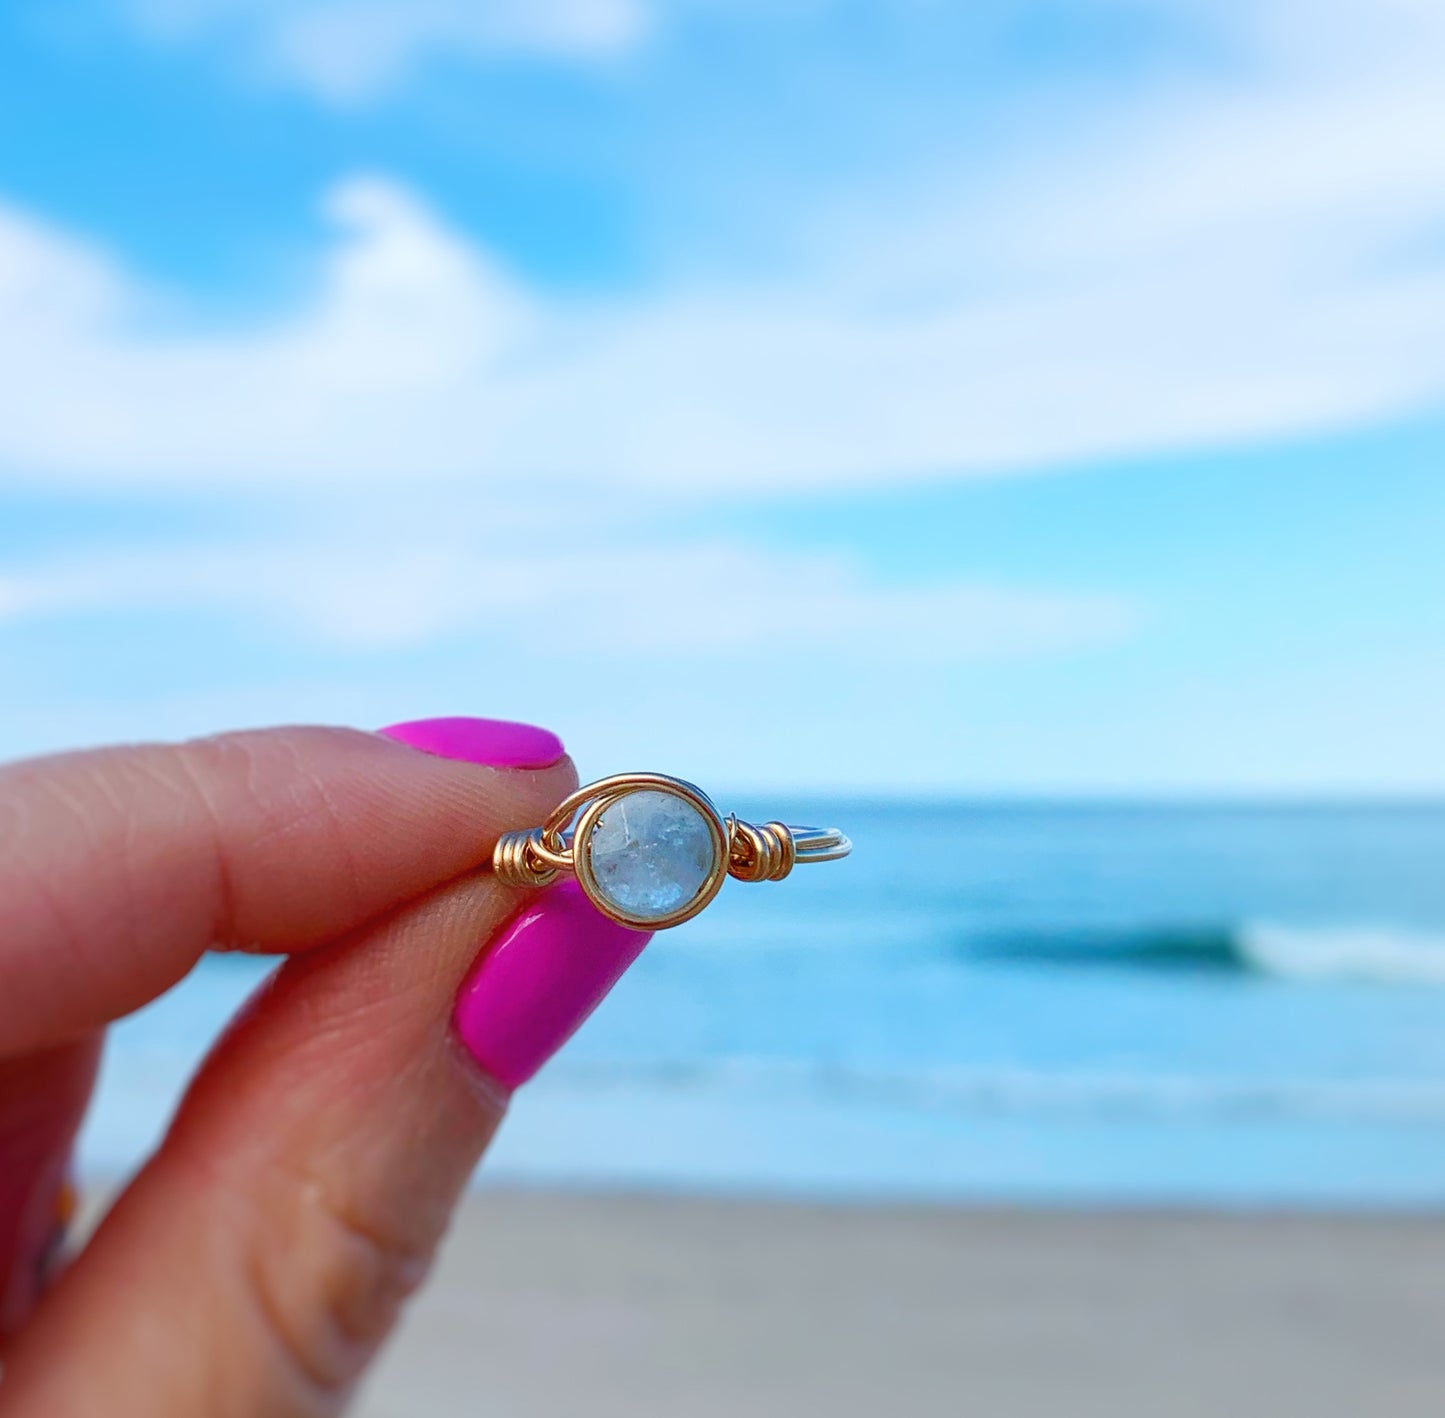 The raindrop ring featuring a coin shaped aquamarine bead is carefully wrapped in 14k gold filled wire into a wearable ring. this ring is being held up between fingers in front of a beach background